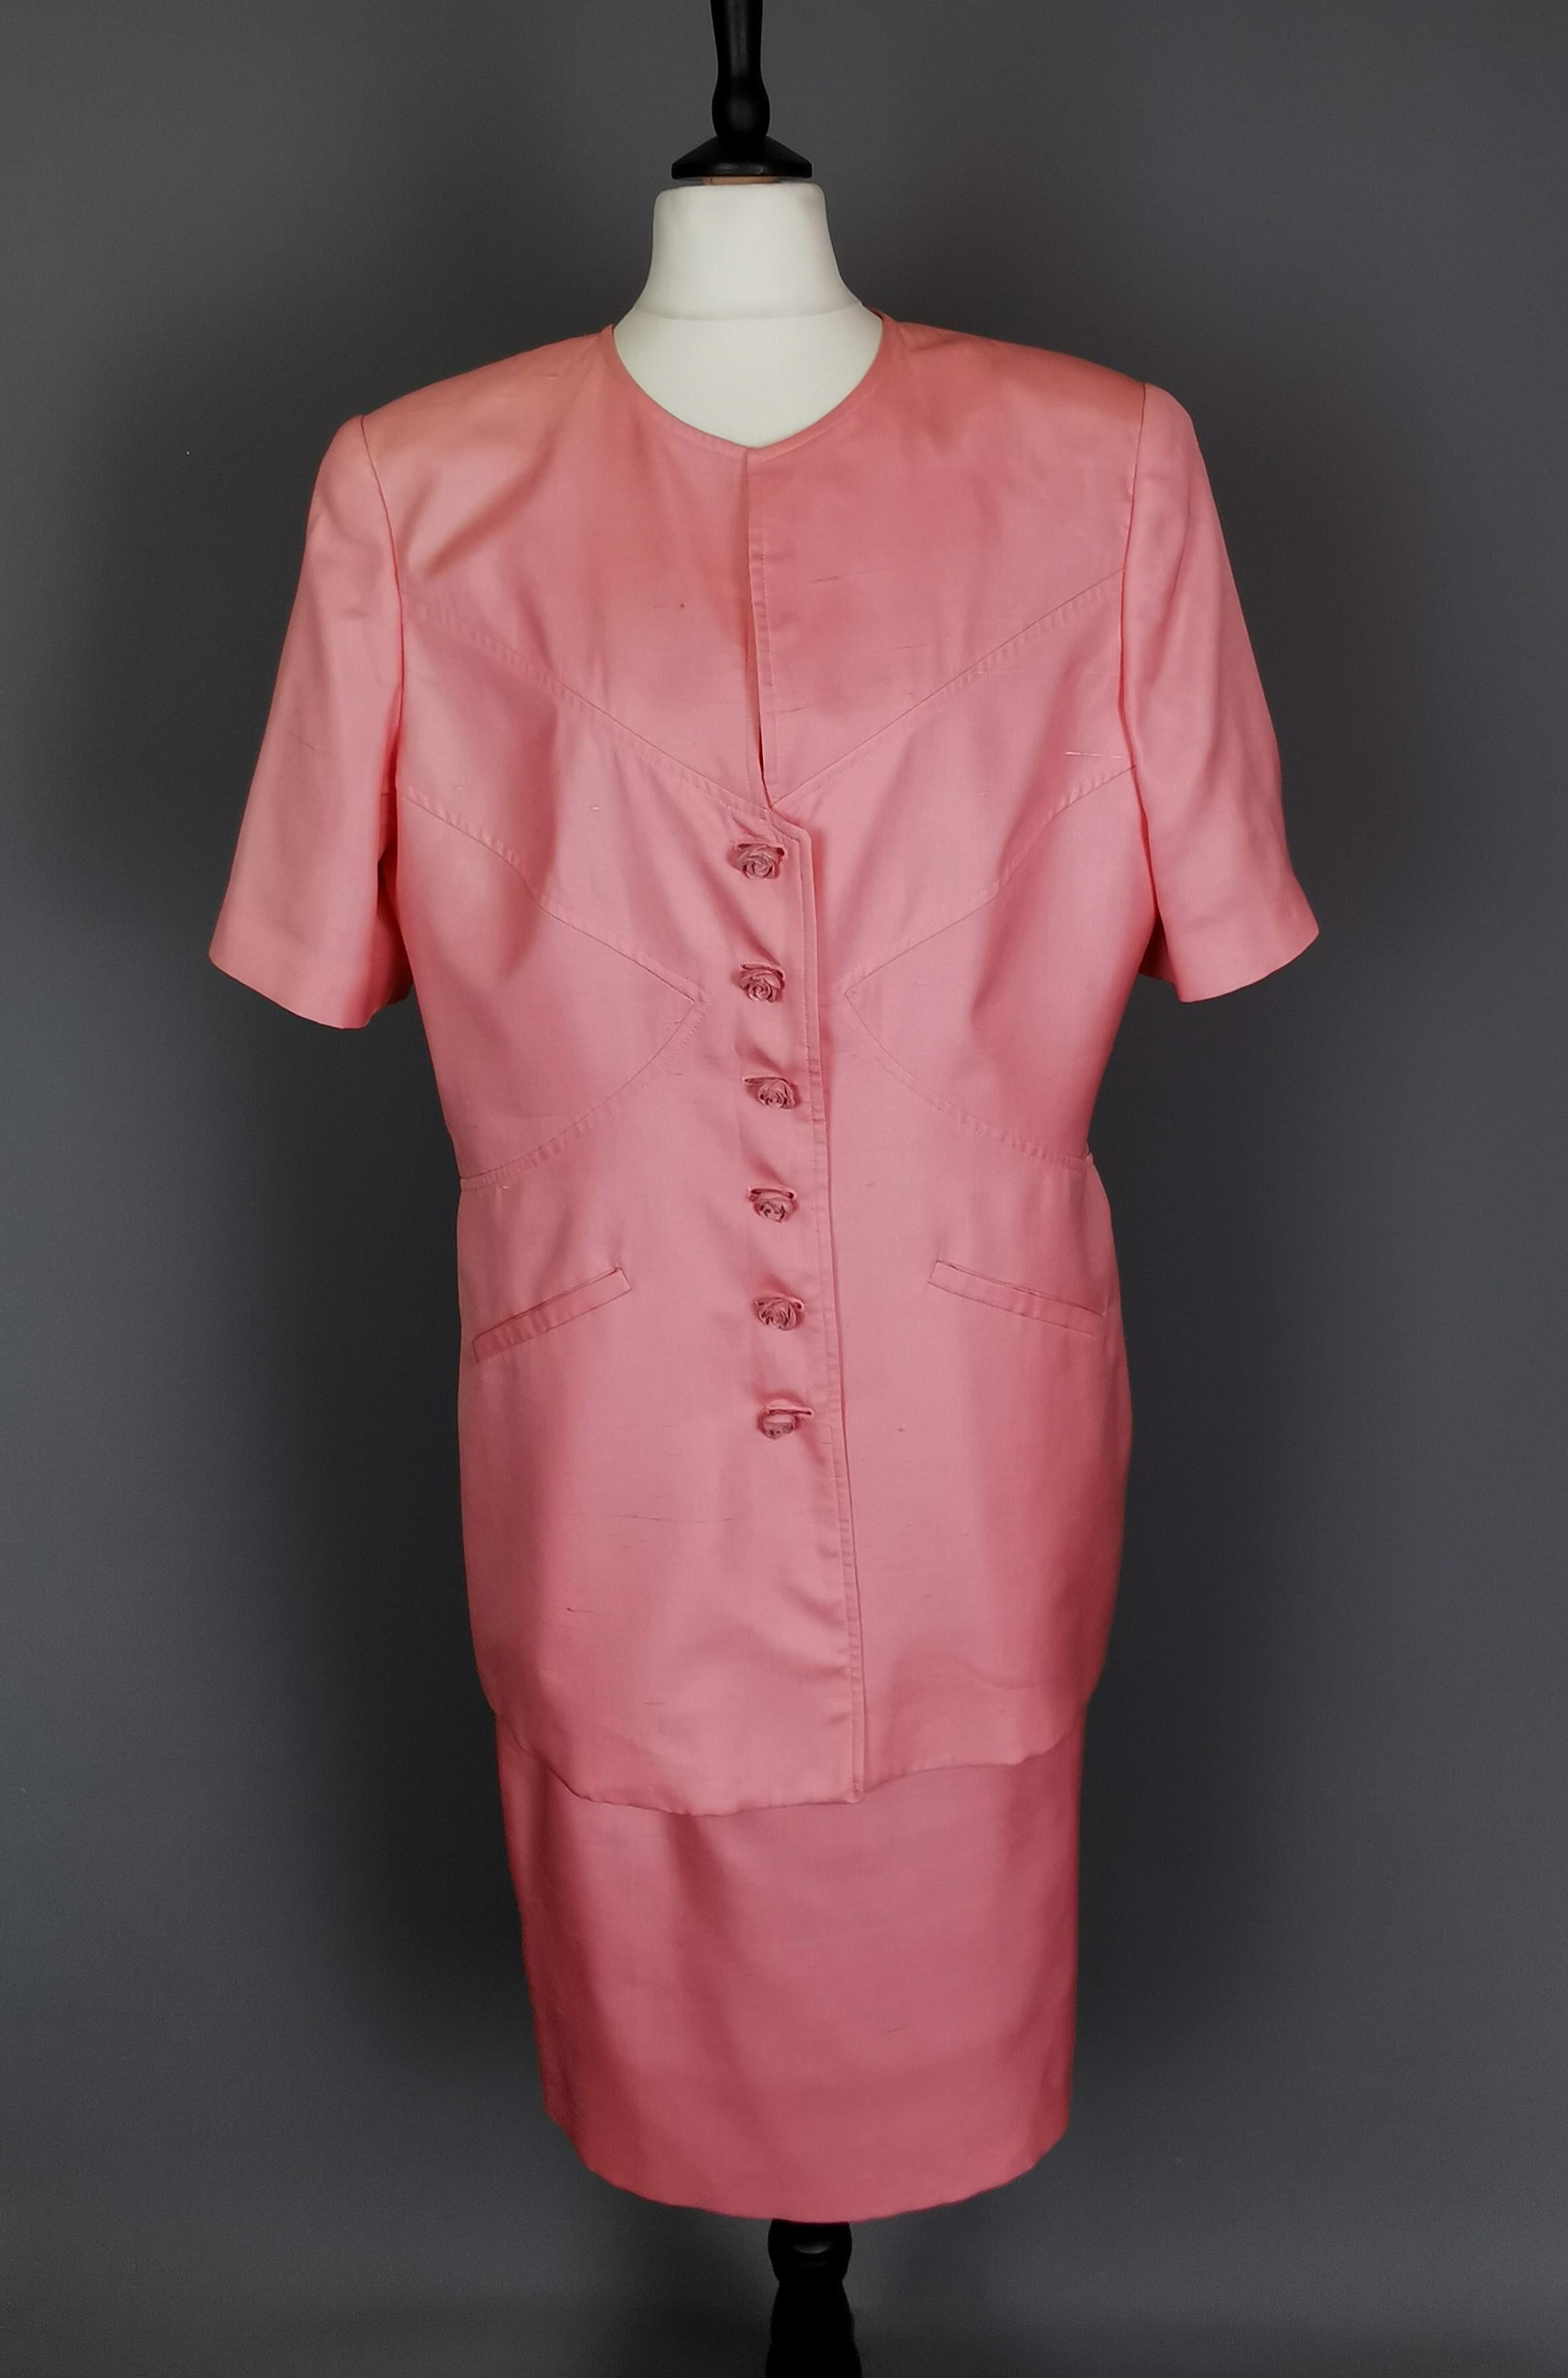 A gorgeous vintage 1980s skirt suit by Valentino.

This is the ultimate in feminine power dressing with the large boxy, padded shoulders contrasting with the pretty Rose stylised buttons.

Made from 100% silk it is a warm dusky pink shade.

The